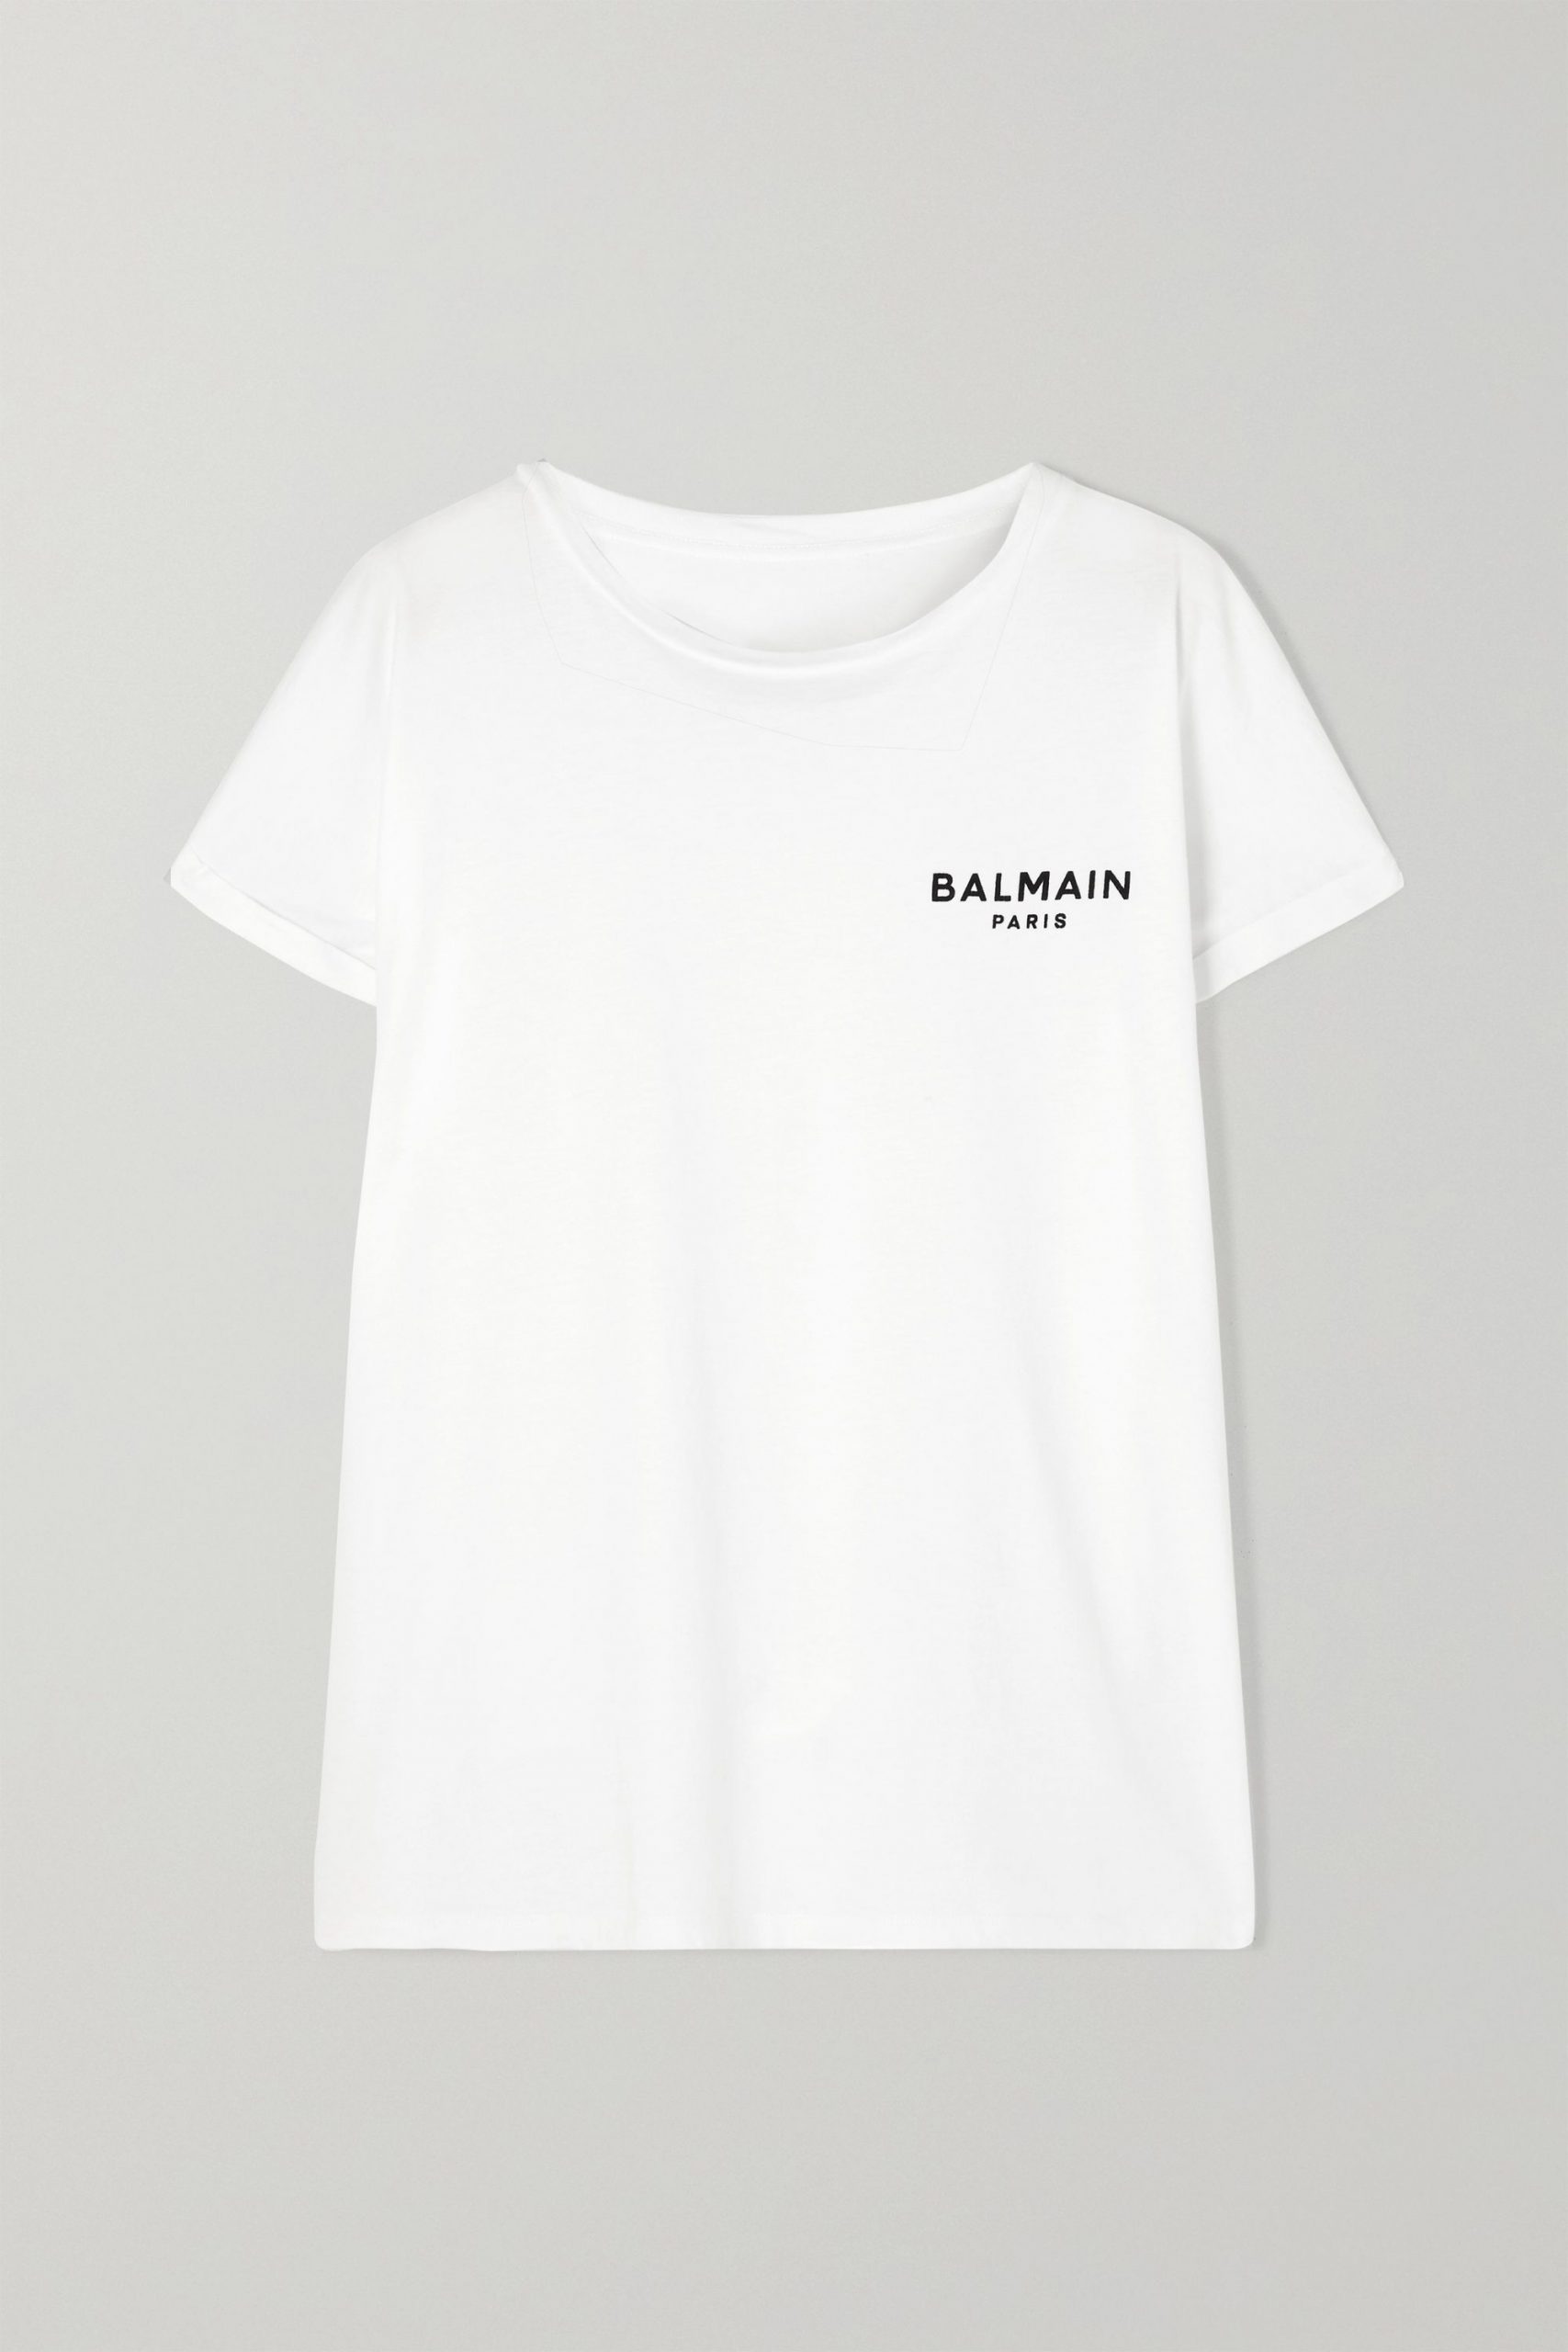 Balmain - Flocked Cotton-Jersey T-Shirt | ABOUT ICONS